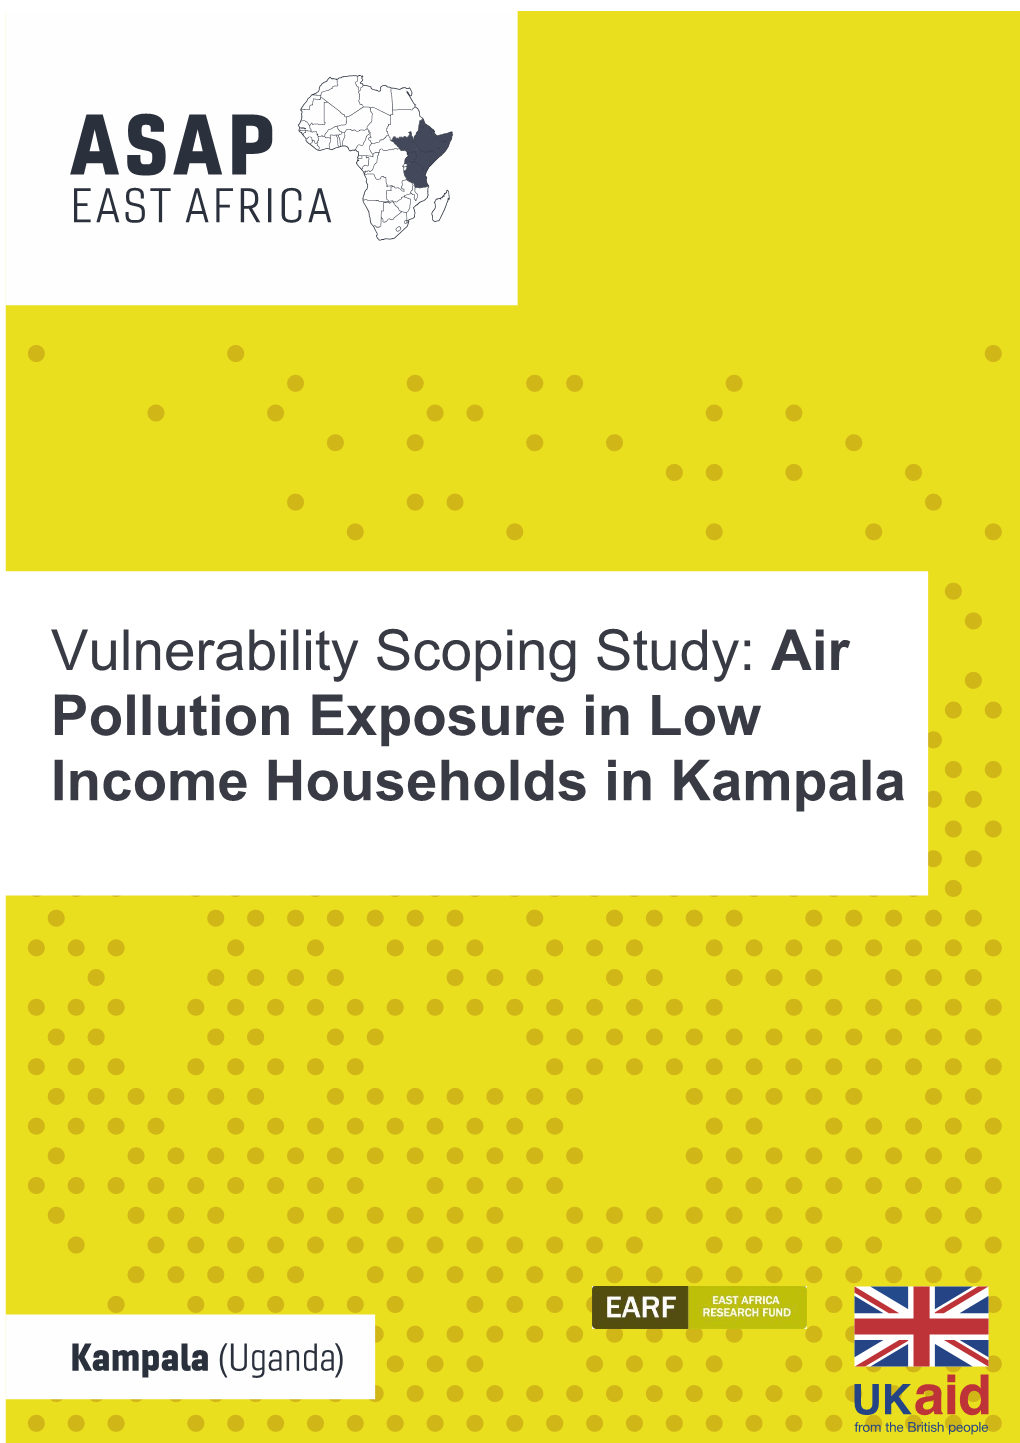 Air Pollution Exposure in Low Income Households in Kampala